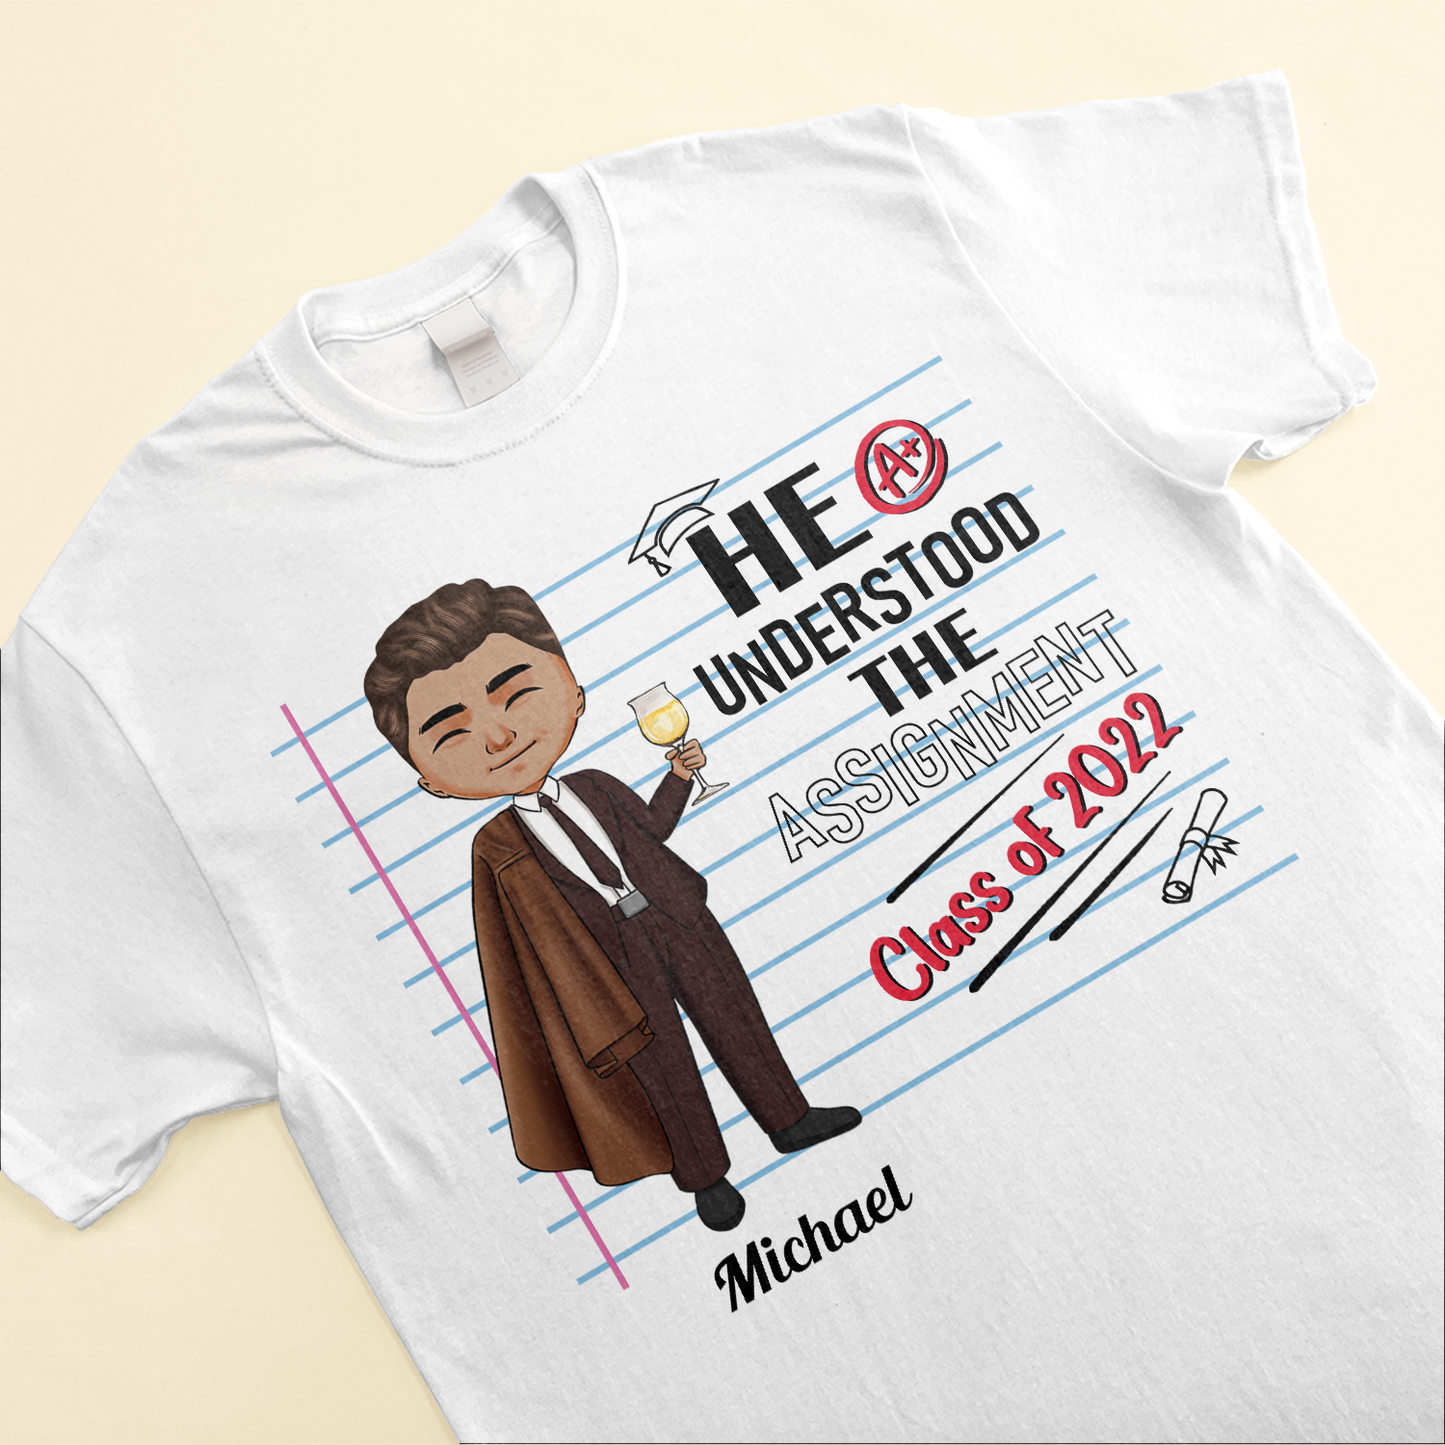 He Understood The Assignment - Personalized Shirt